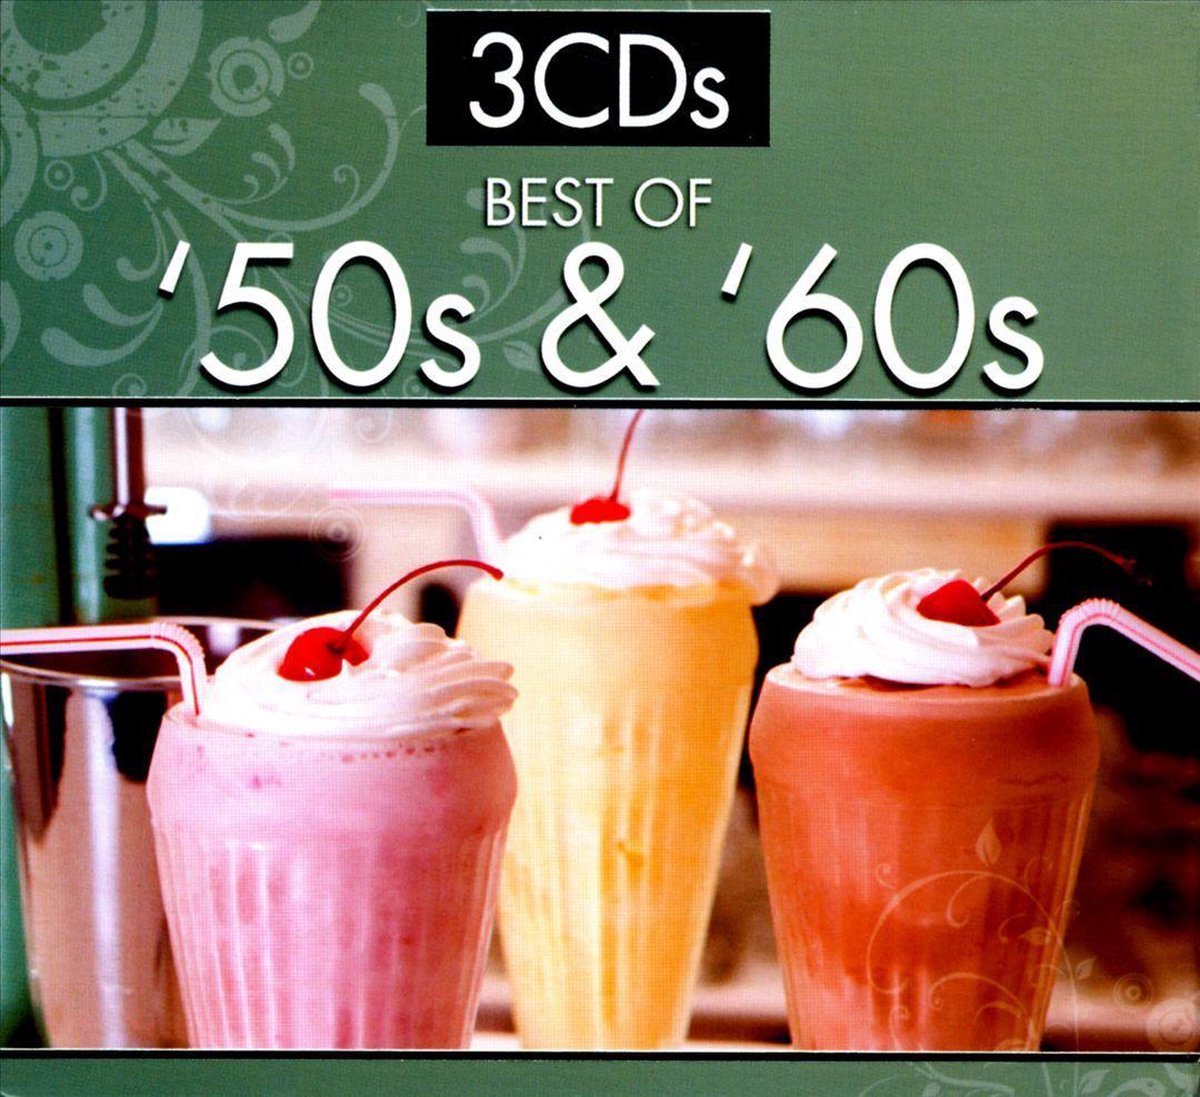 Best of '50s & '60s main product image